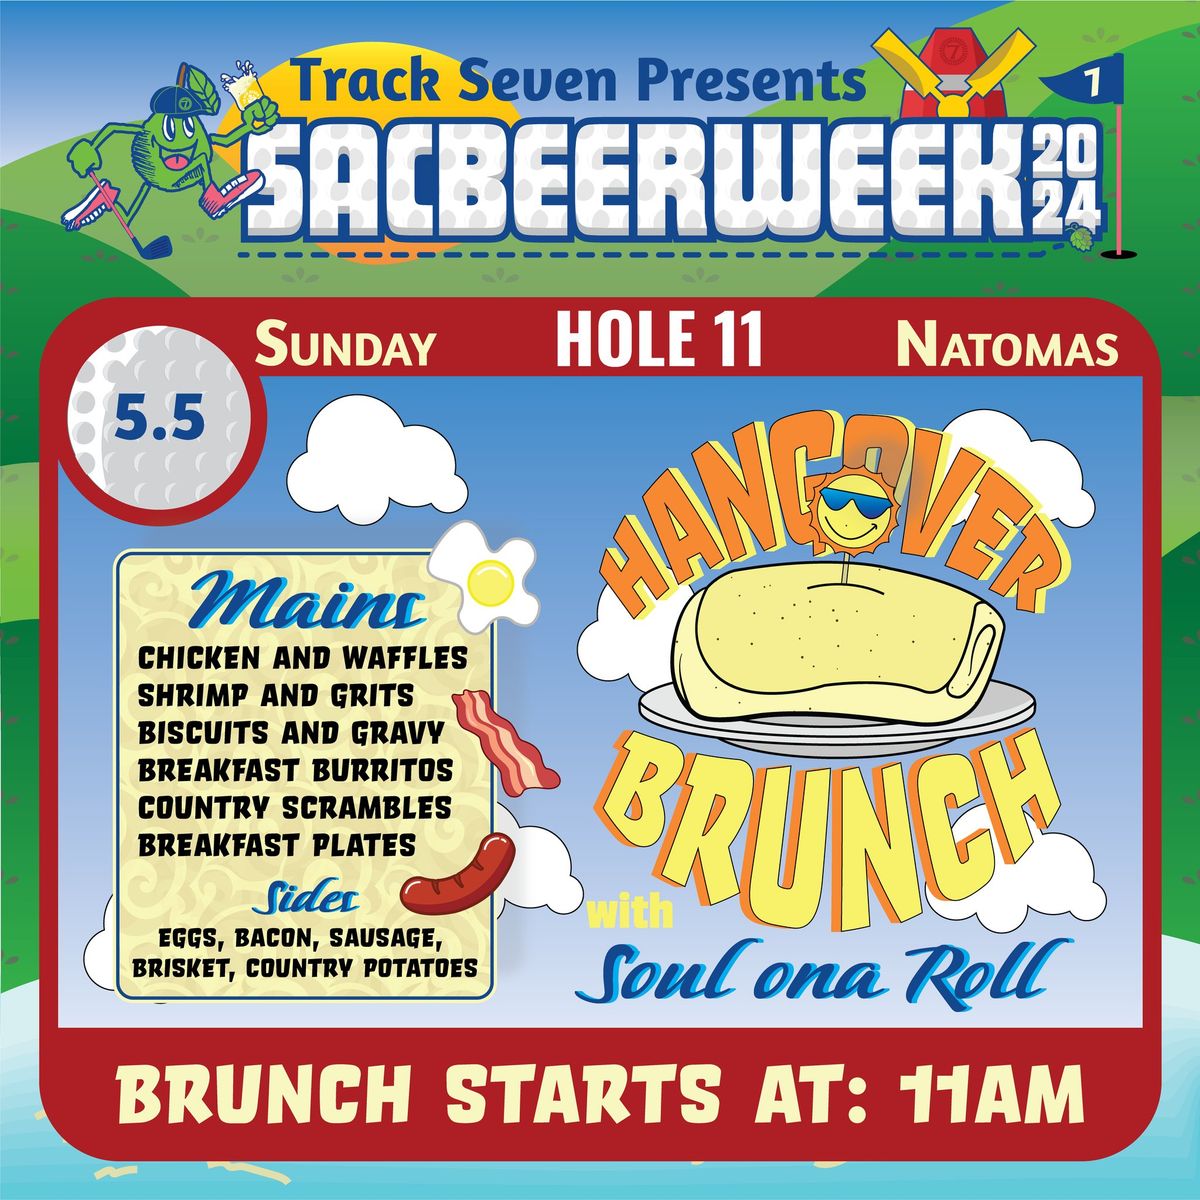 SBW24: Hangover Brunch with Soul ona Roll